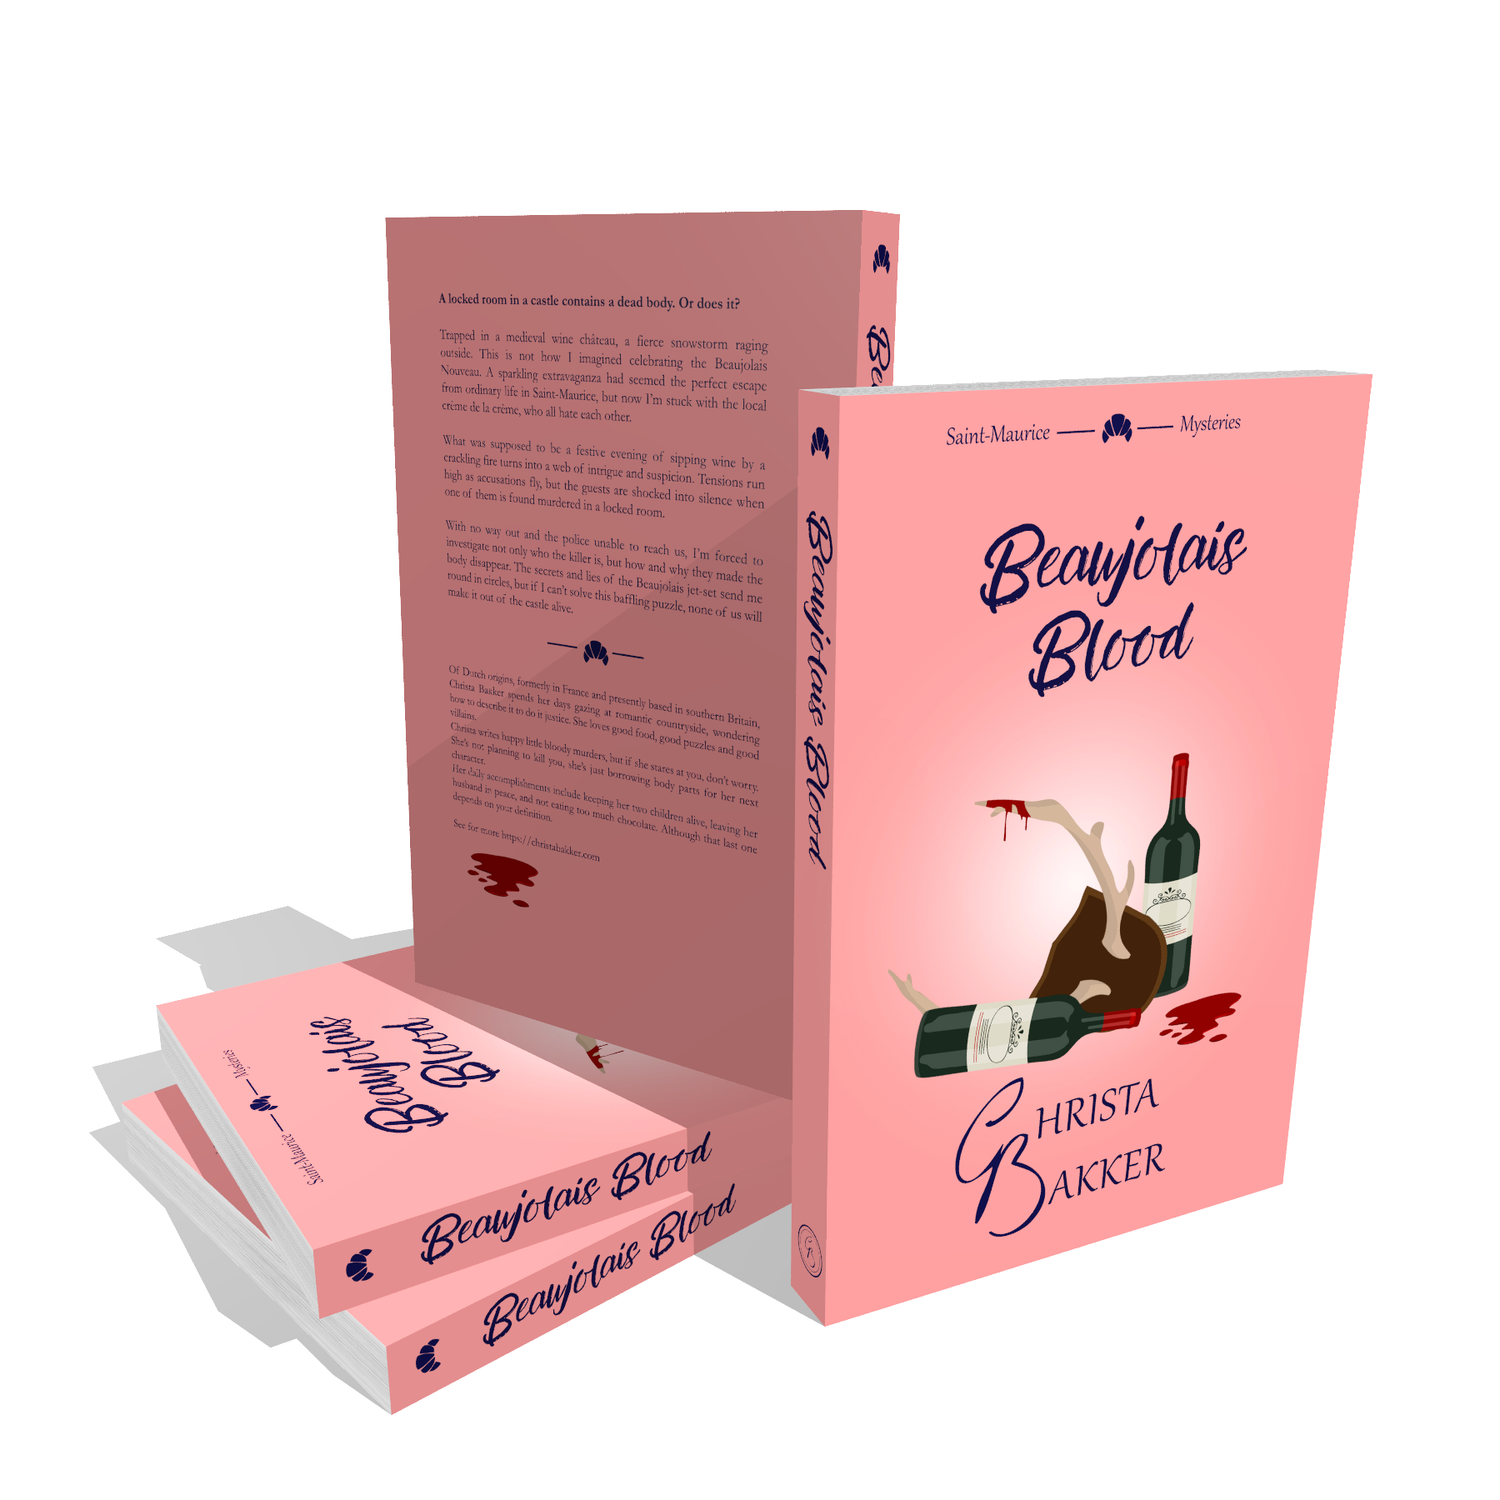 The cover of Beaujolais Blood shows two bottles of red wine on a pink background. One of the bottles has toppled and spilled some. In between lies a mounted antler with a suspicious red drip on its tip.